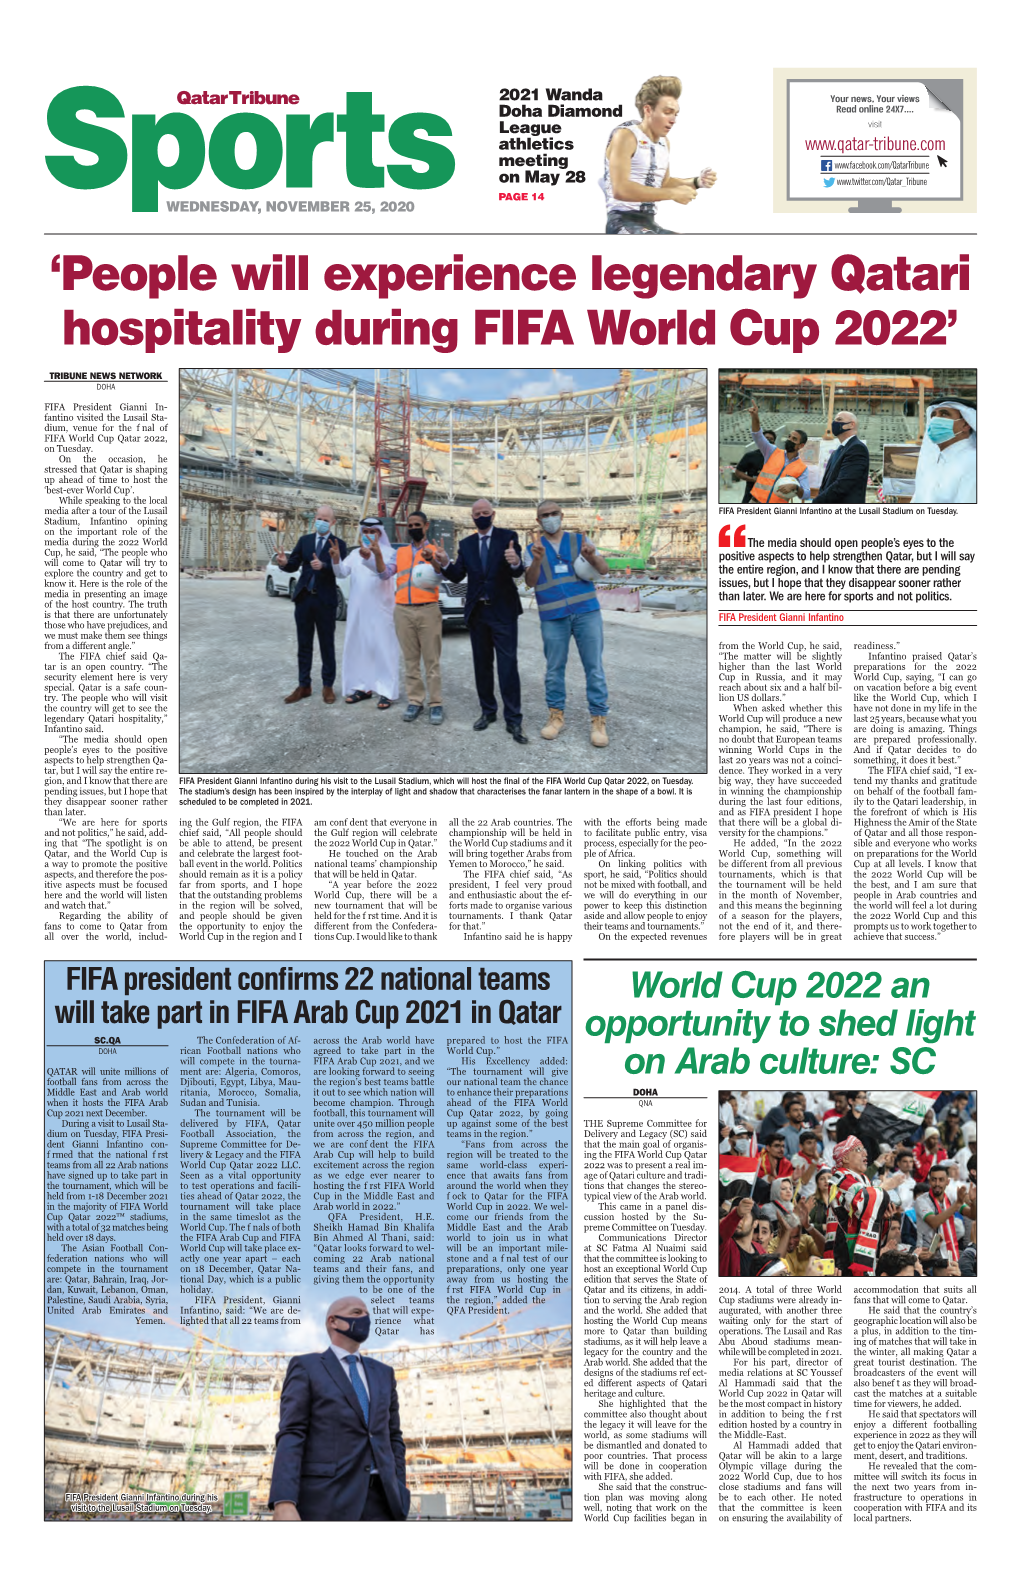 People Will Experience Legendary Qatari Hospitality During FIFA World Cup 2022’